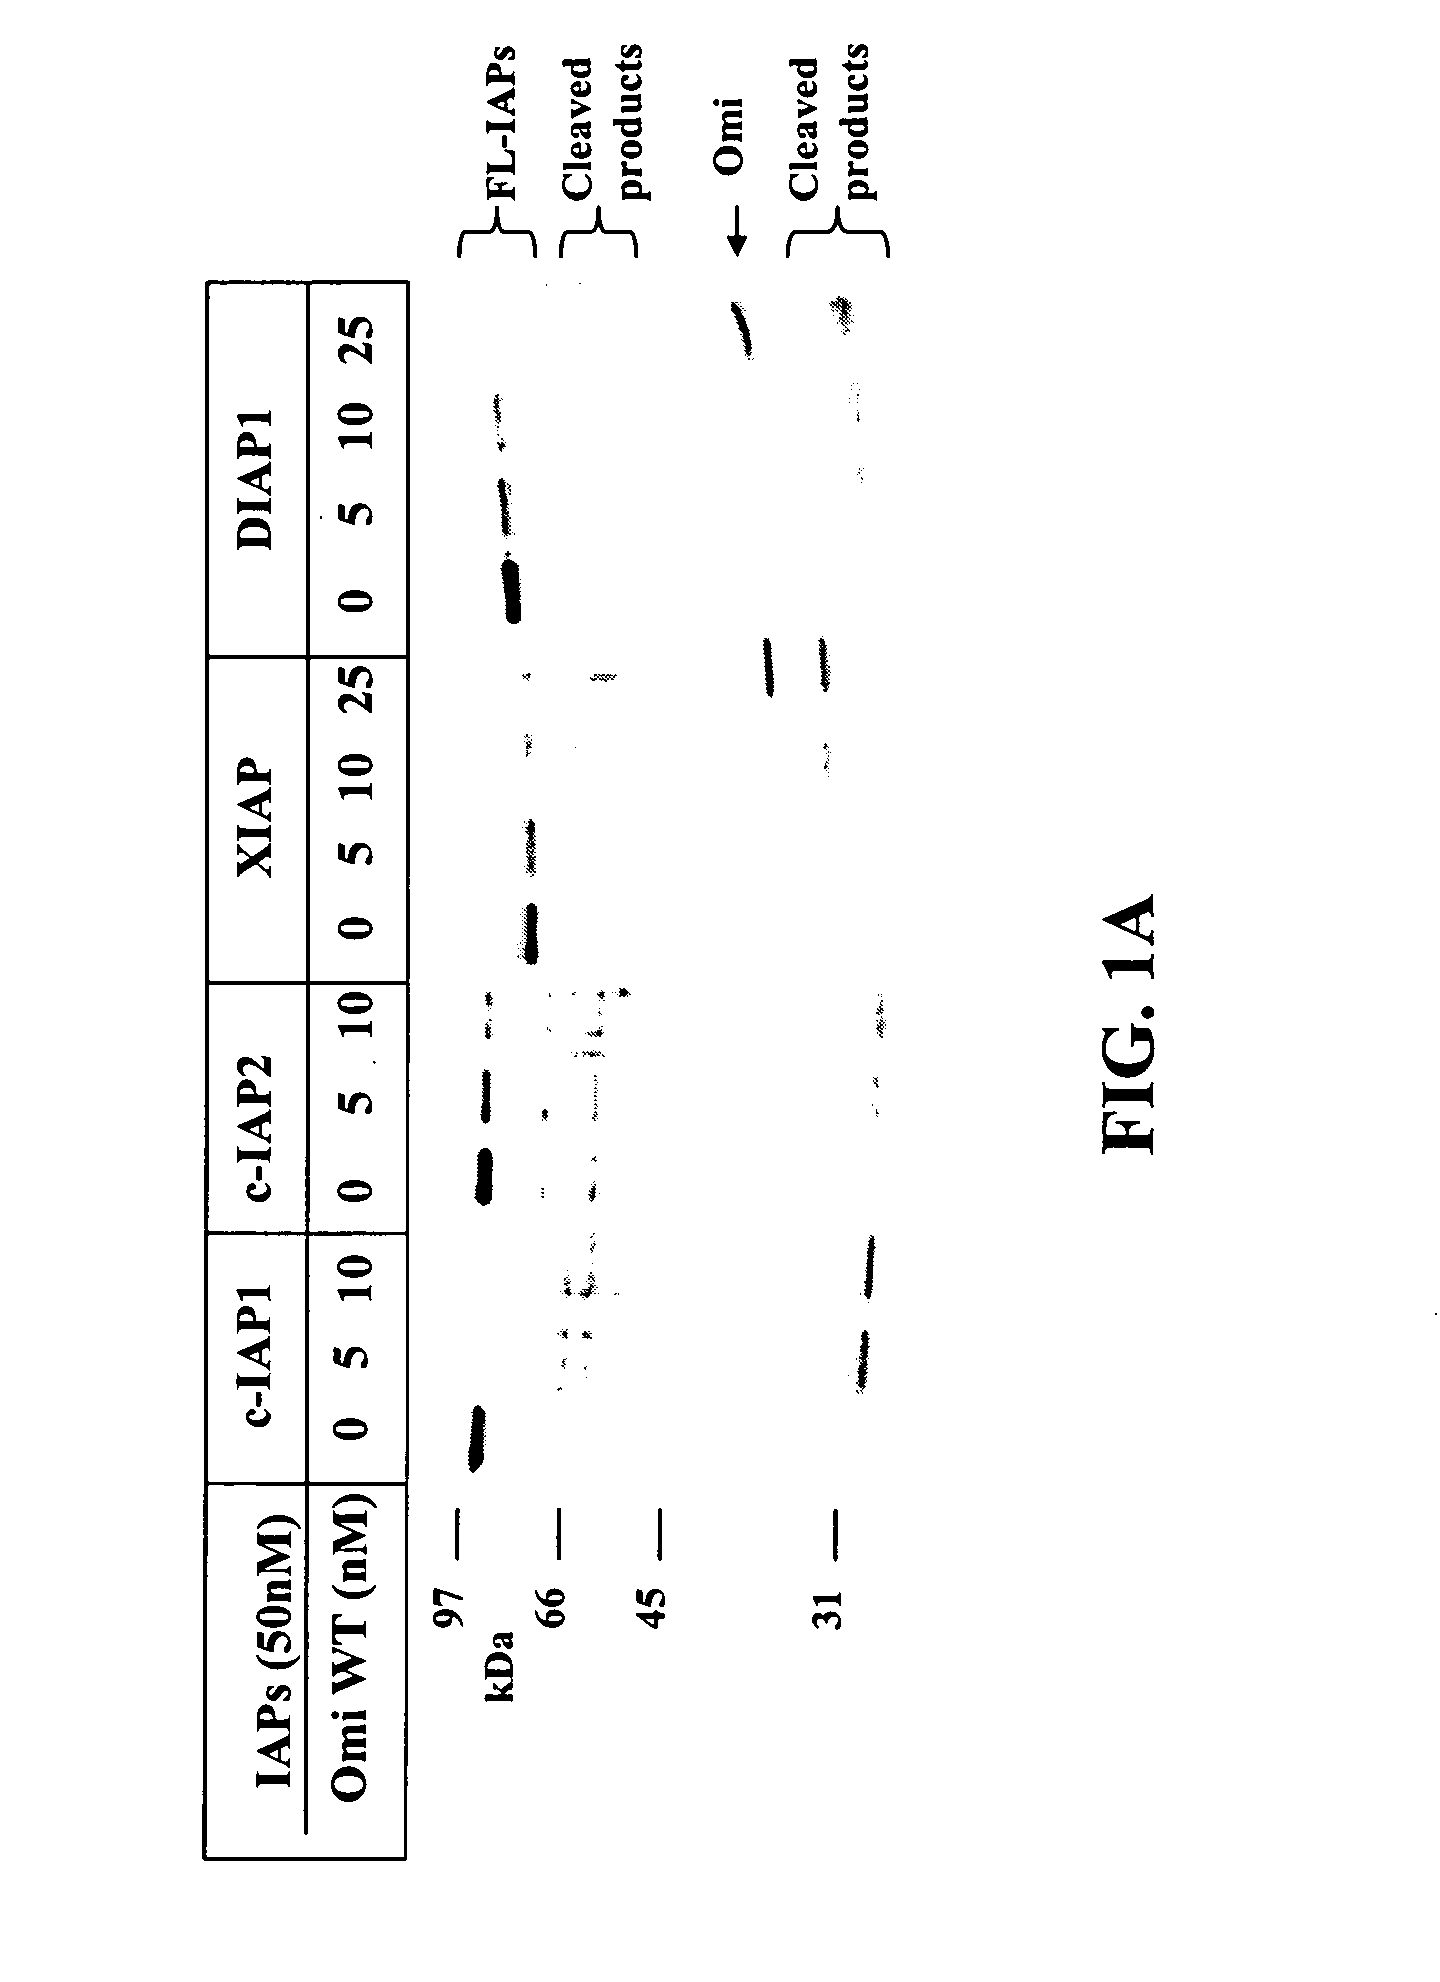 Compositions and methods for cleaving IAP